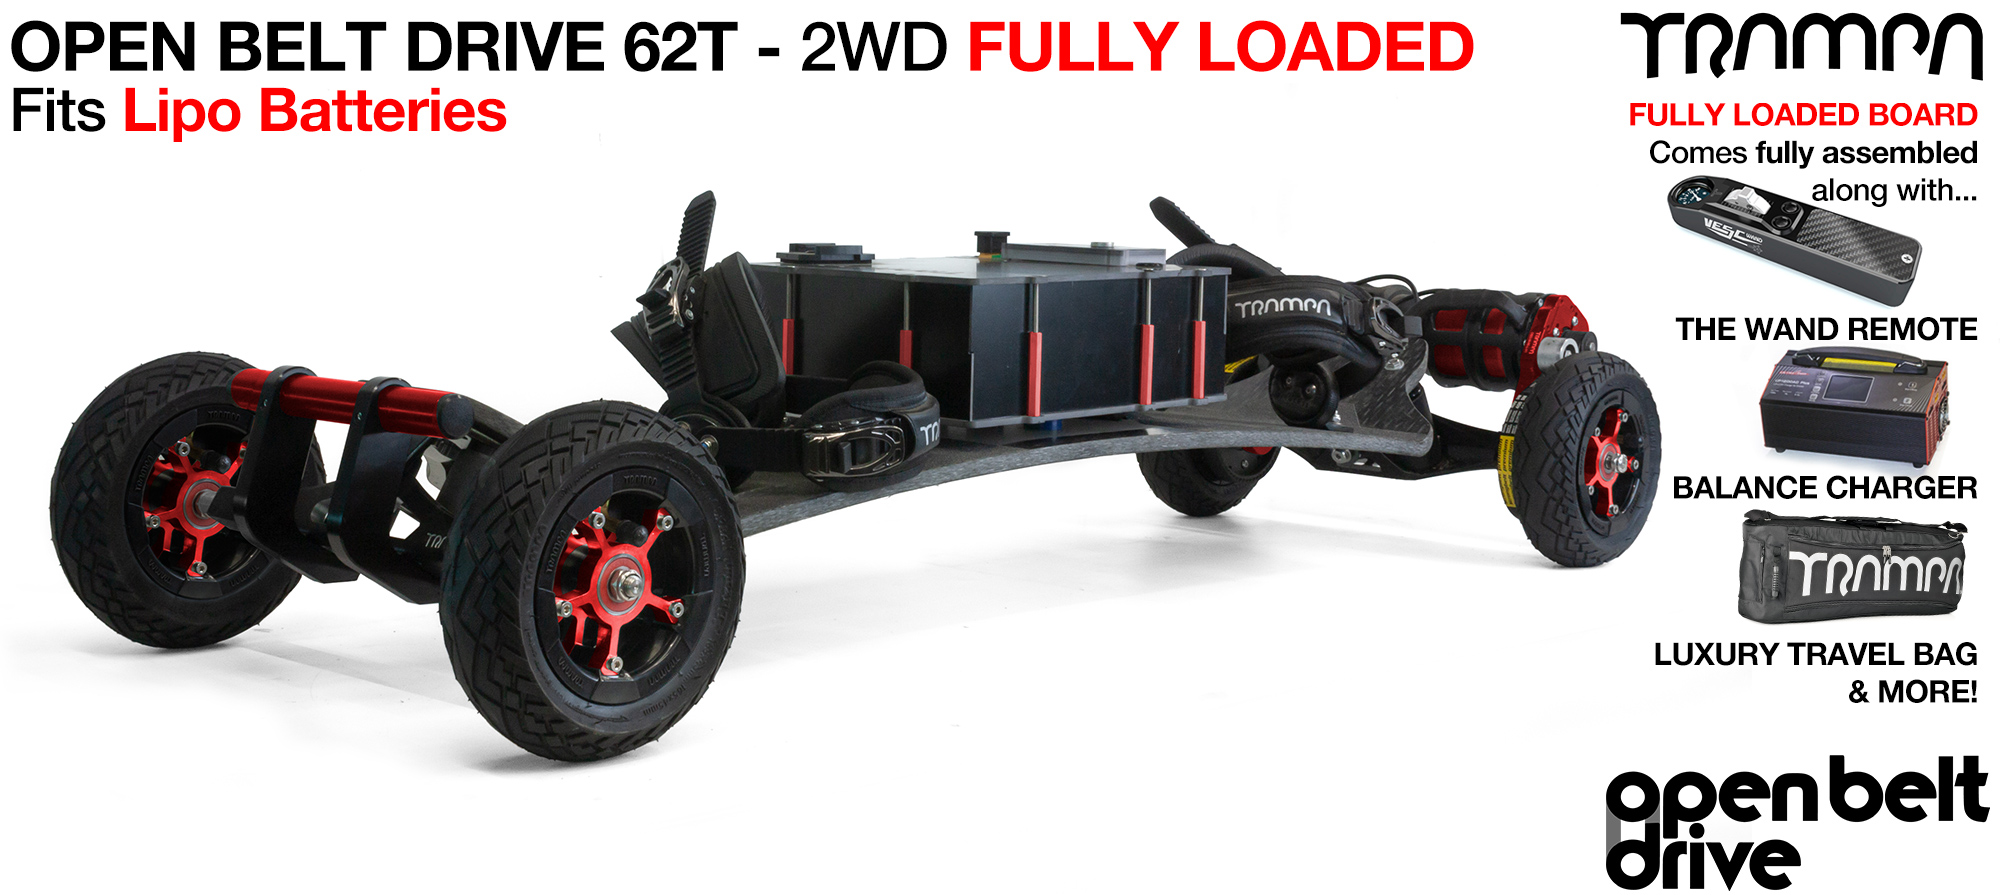 2WD 66T Open Belt Drive TRAMPA Electric Mountainboard with 6 Inch URBAN TREADs Wheels & 62 Tooth Pulleys - FULLY LOADED DOUBLE STACK Li-Po